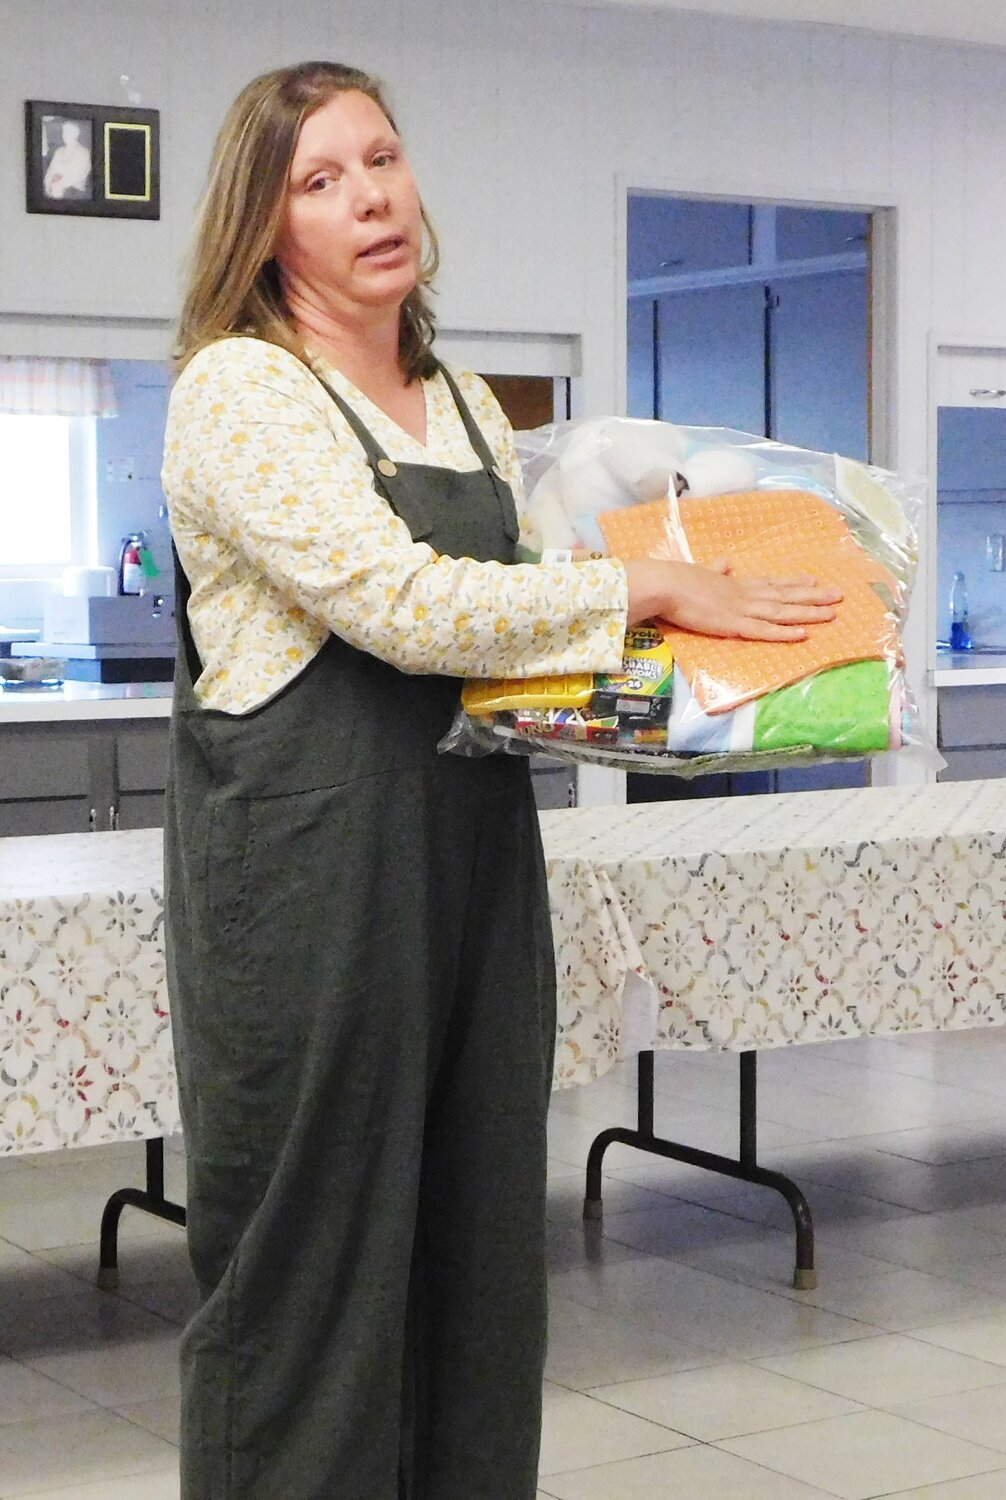 Keri Withers displays one of the packs assembled by her organization and distributed to children who are placed into foster care. Those packs include personal care items along with quilts sewn by the many volunteers who donate their time and skills to benefit the children.